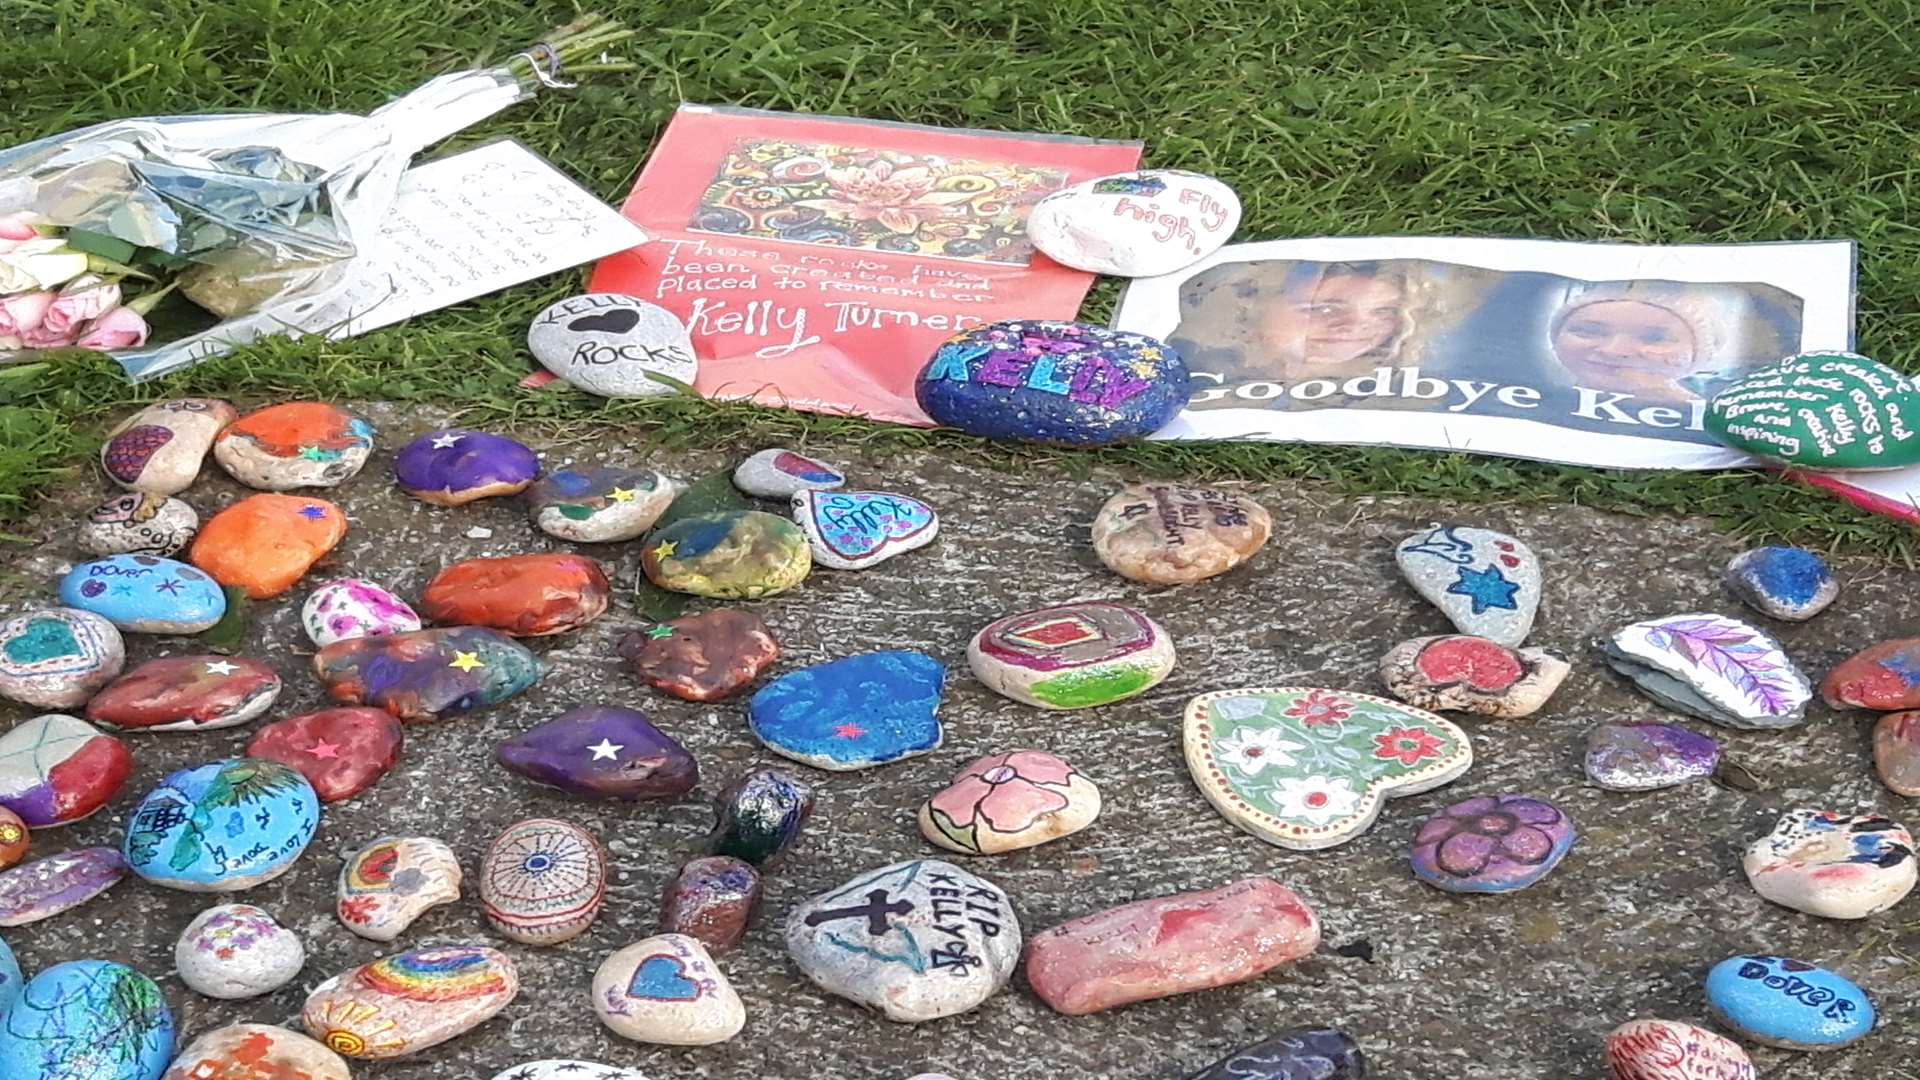 The tribute stones with messages for Kelly Turner